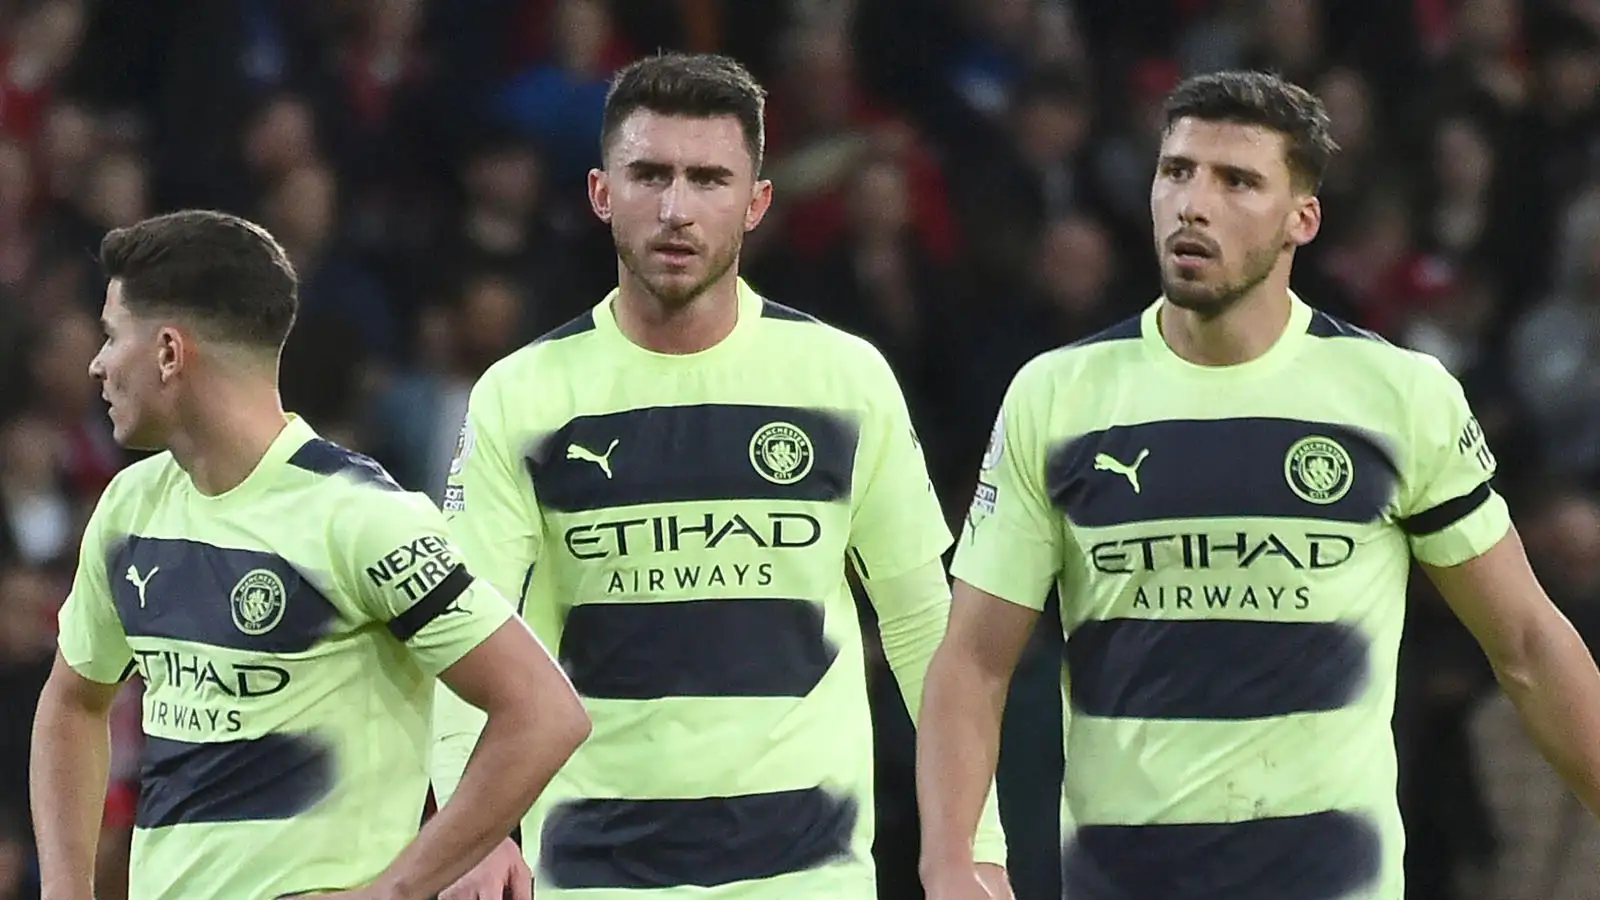 Manchester City's Julian Alvarez, left, Manchester City's Aymeric Laporte, centre, Manchester City's Ruben Dias walk on the pitch at the end of the English Premier League soccer match between Nottingham Forest and Manchester City at City ground in Nottingham